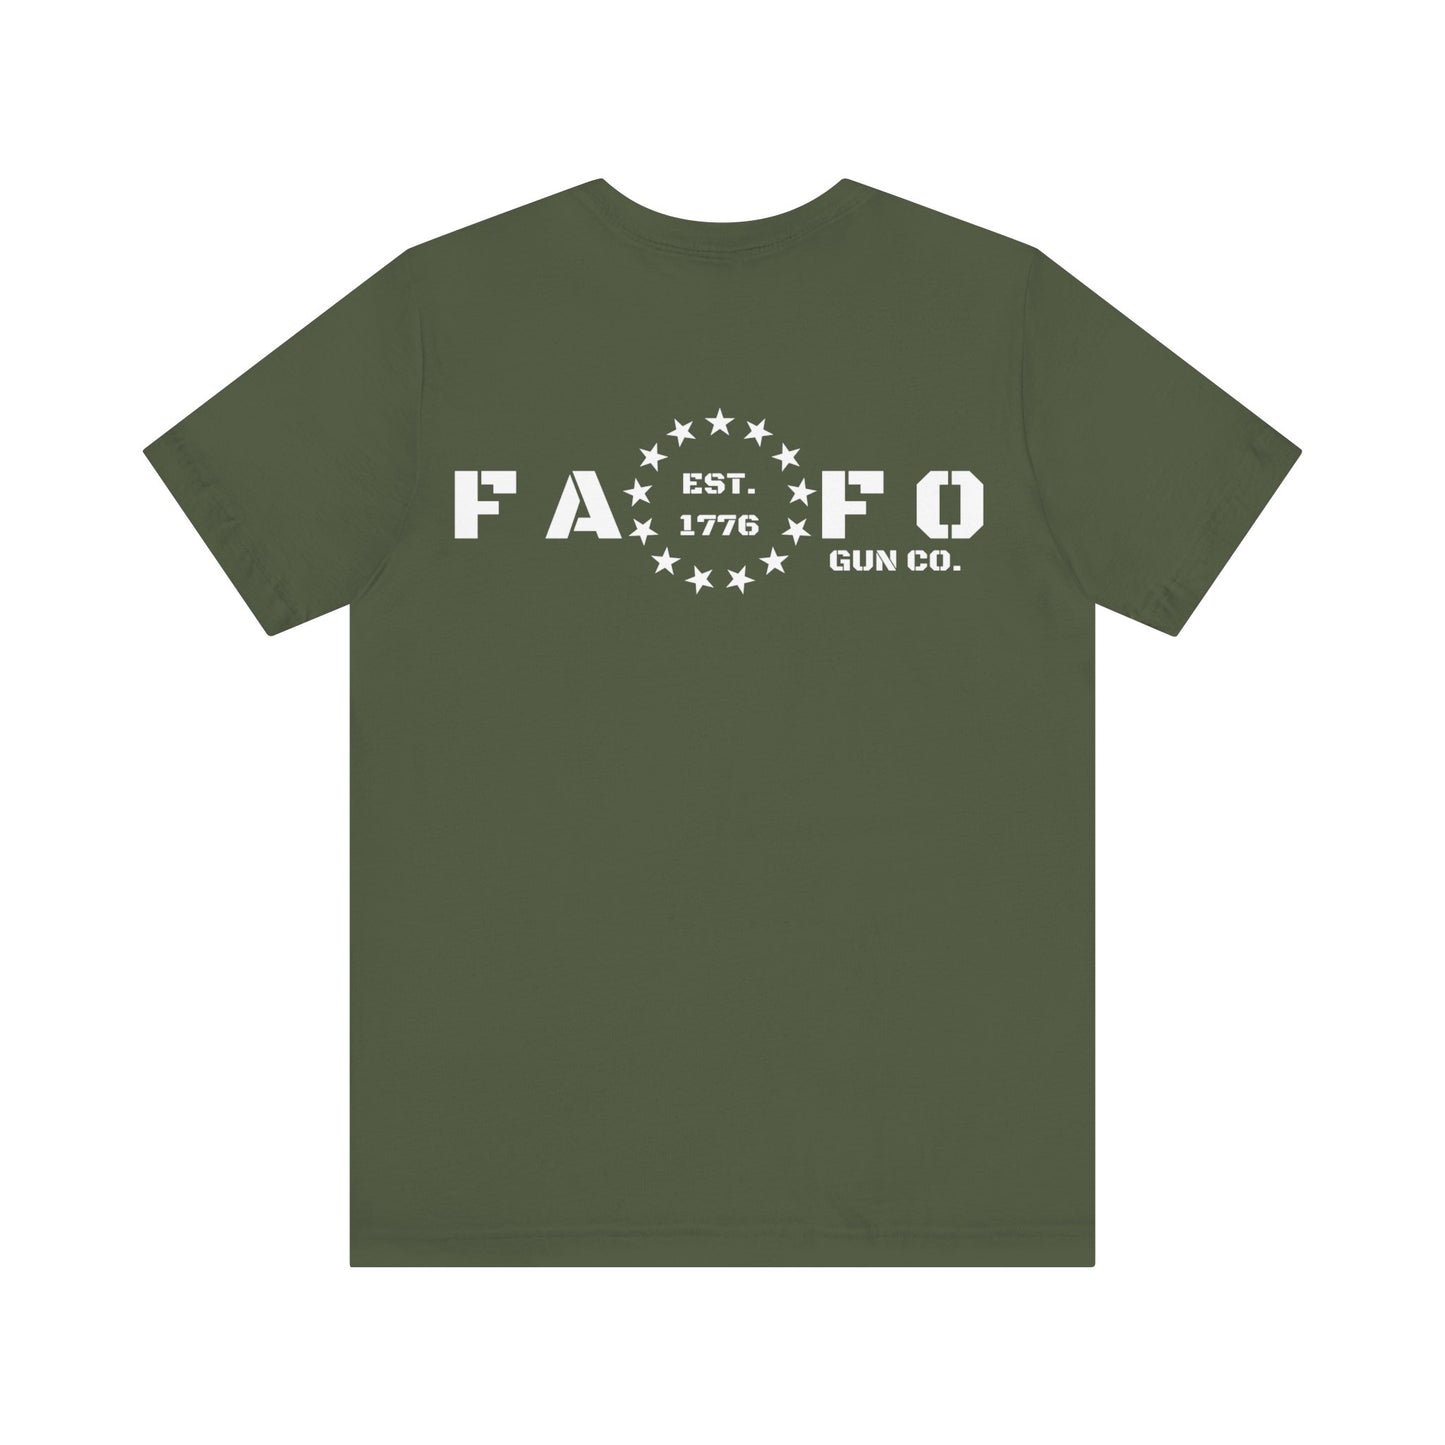 Unisex "I'm Just Here To FAFO" T-Shirt